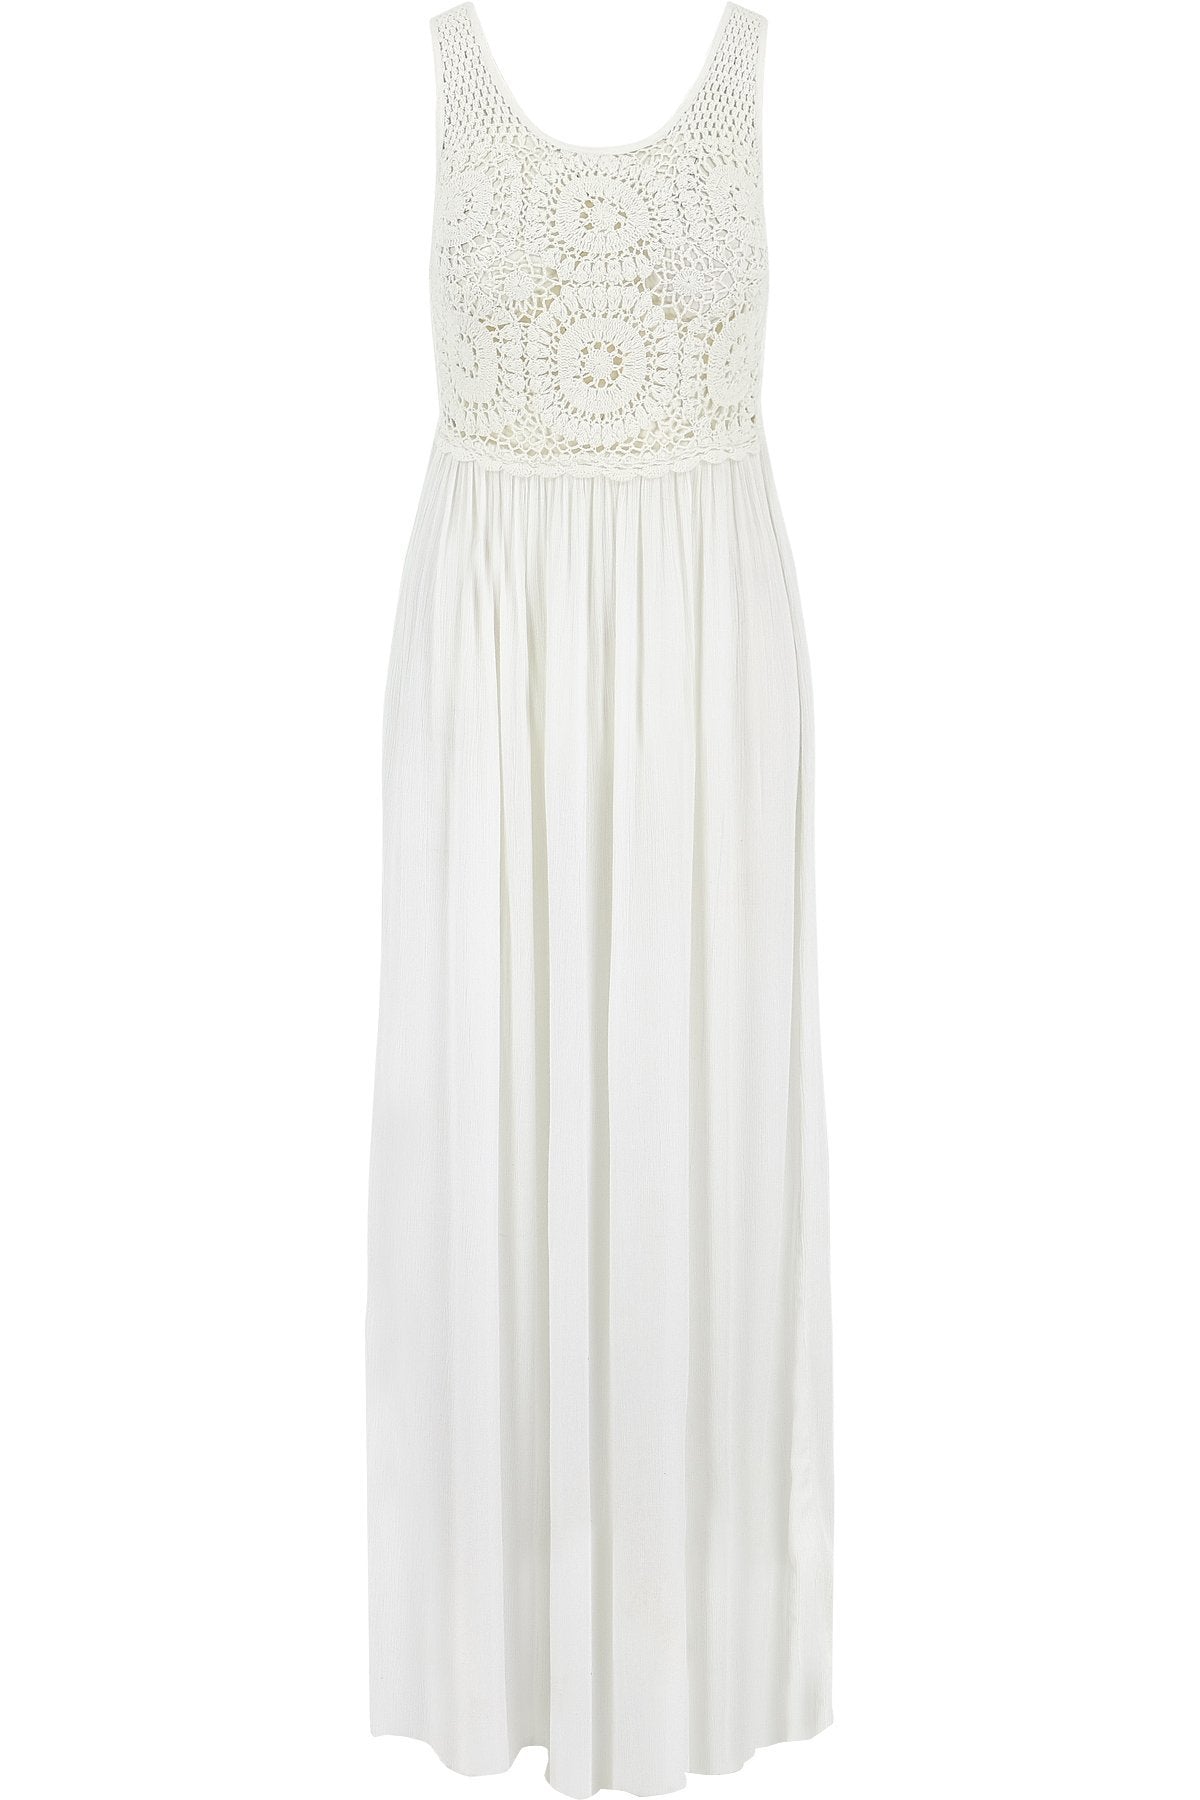 White Maxi Dress with Crocheted Top